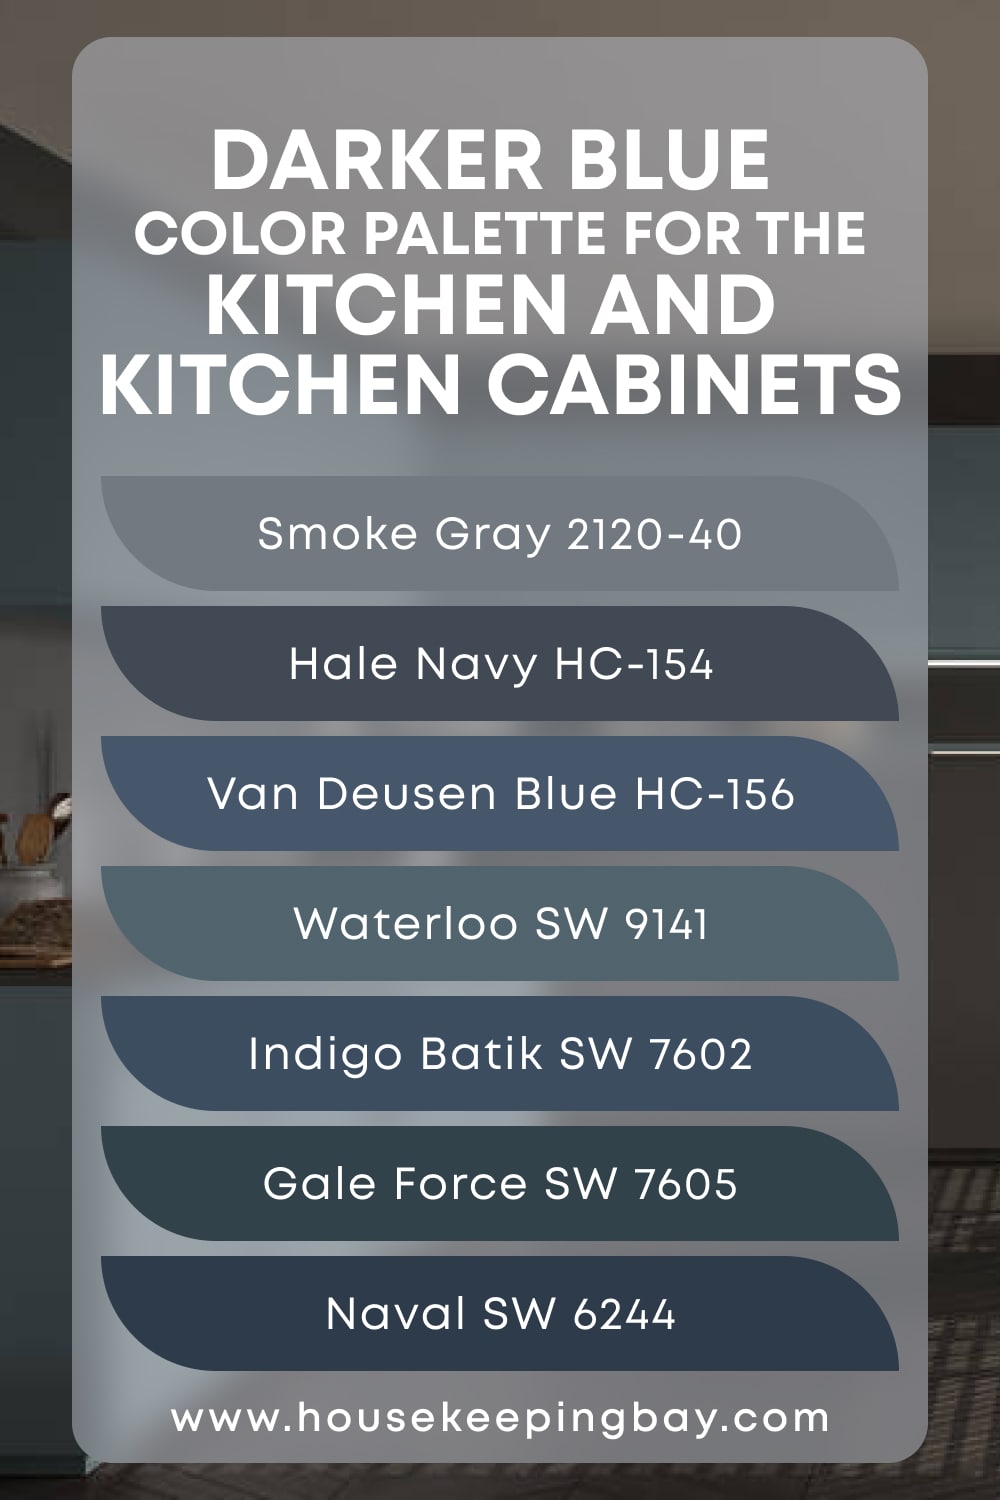 Darker Blue Color Palette for the Kitchen and Kitchen Cabinets